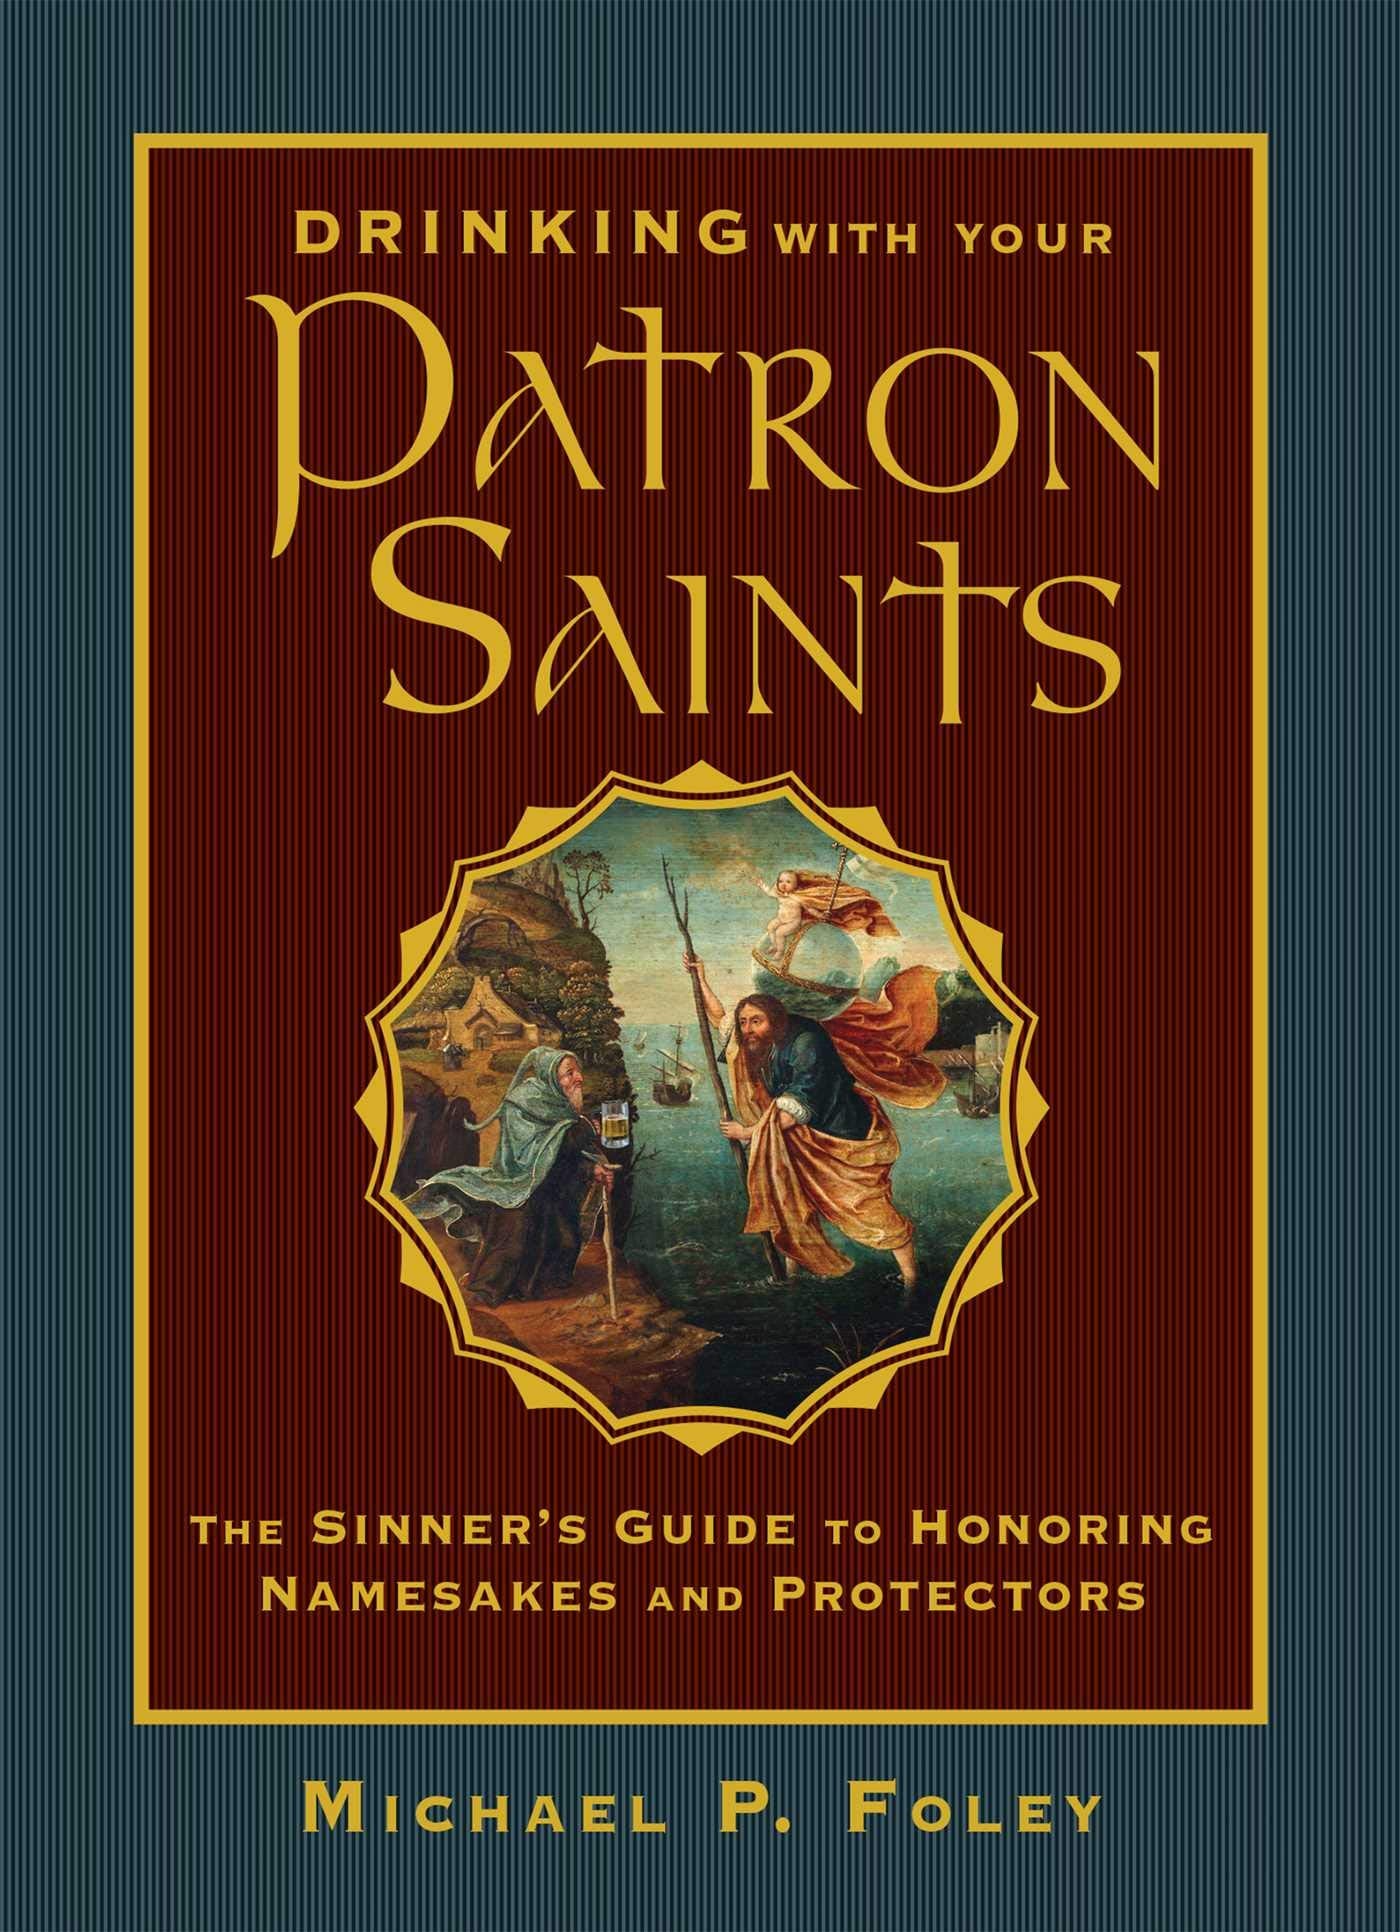 Drinking with Your Patron Saints